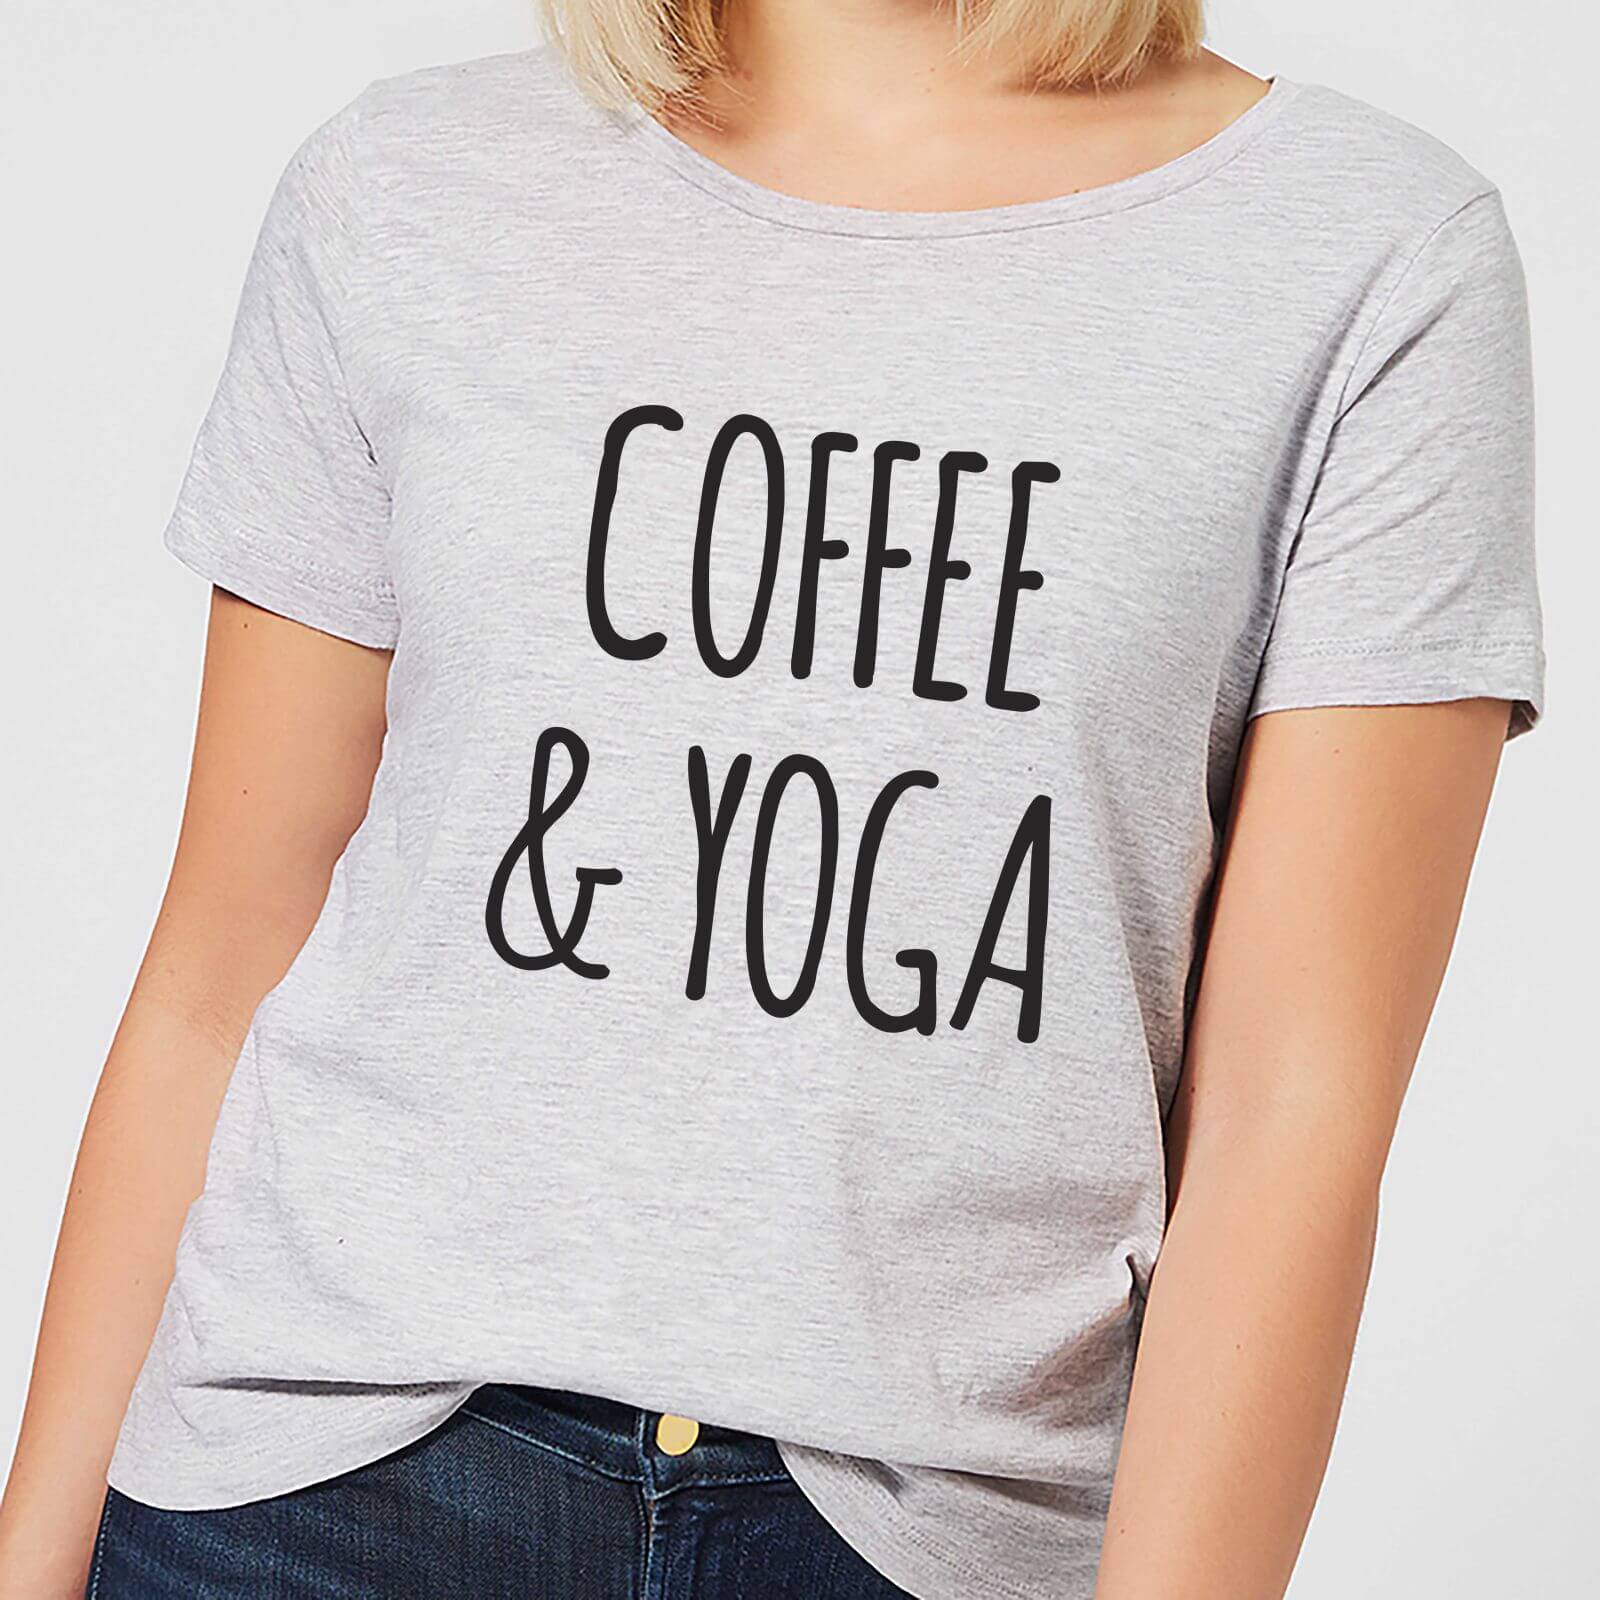 Fitness and Loungewear Coffee and Yoga Women's T-Shirt - Grey - 4XL - Grey